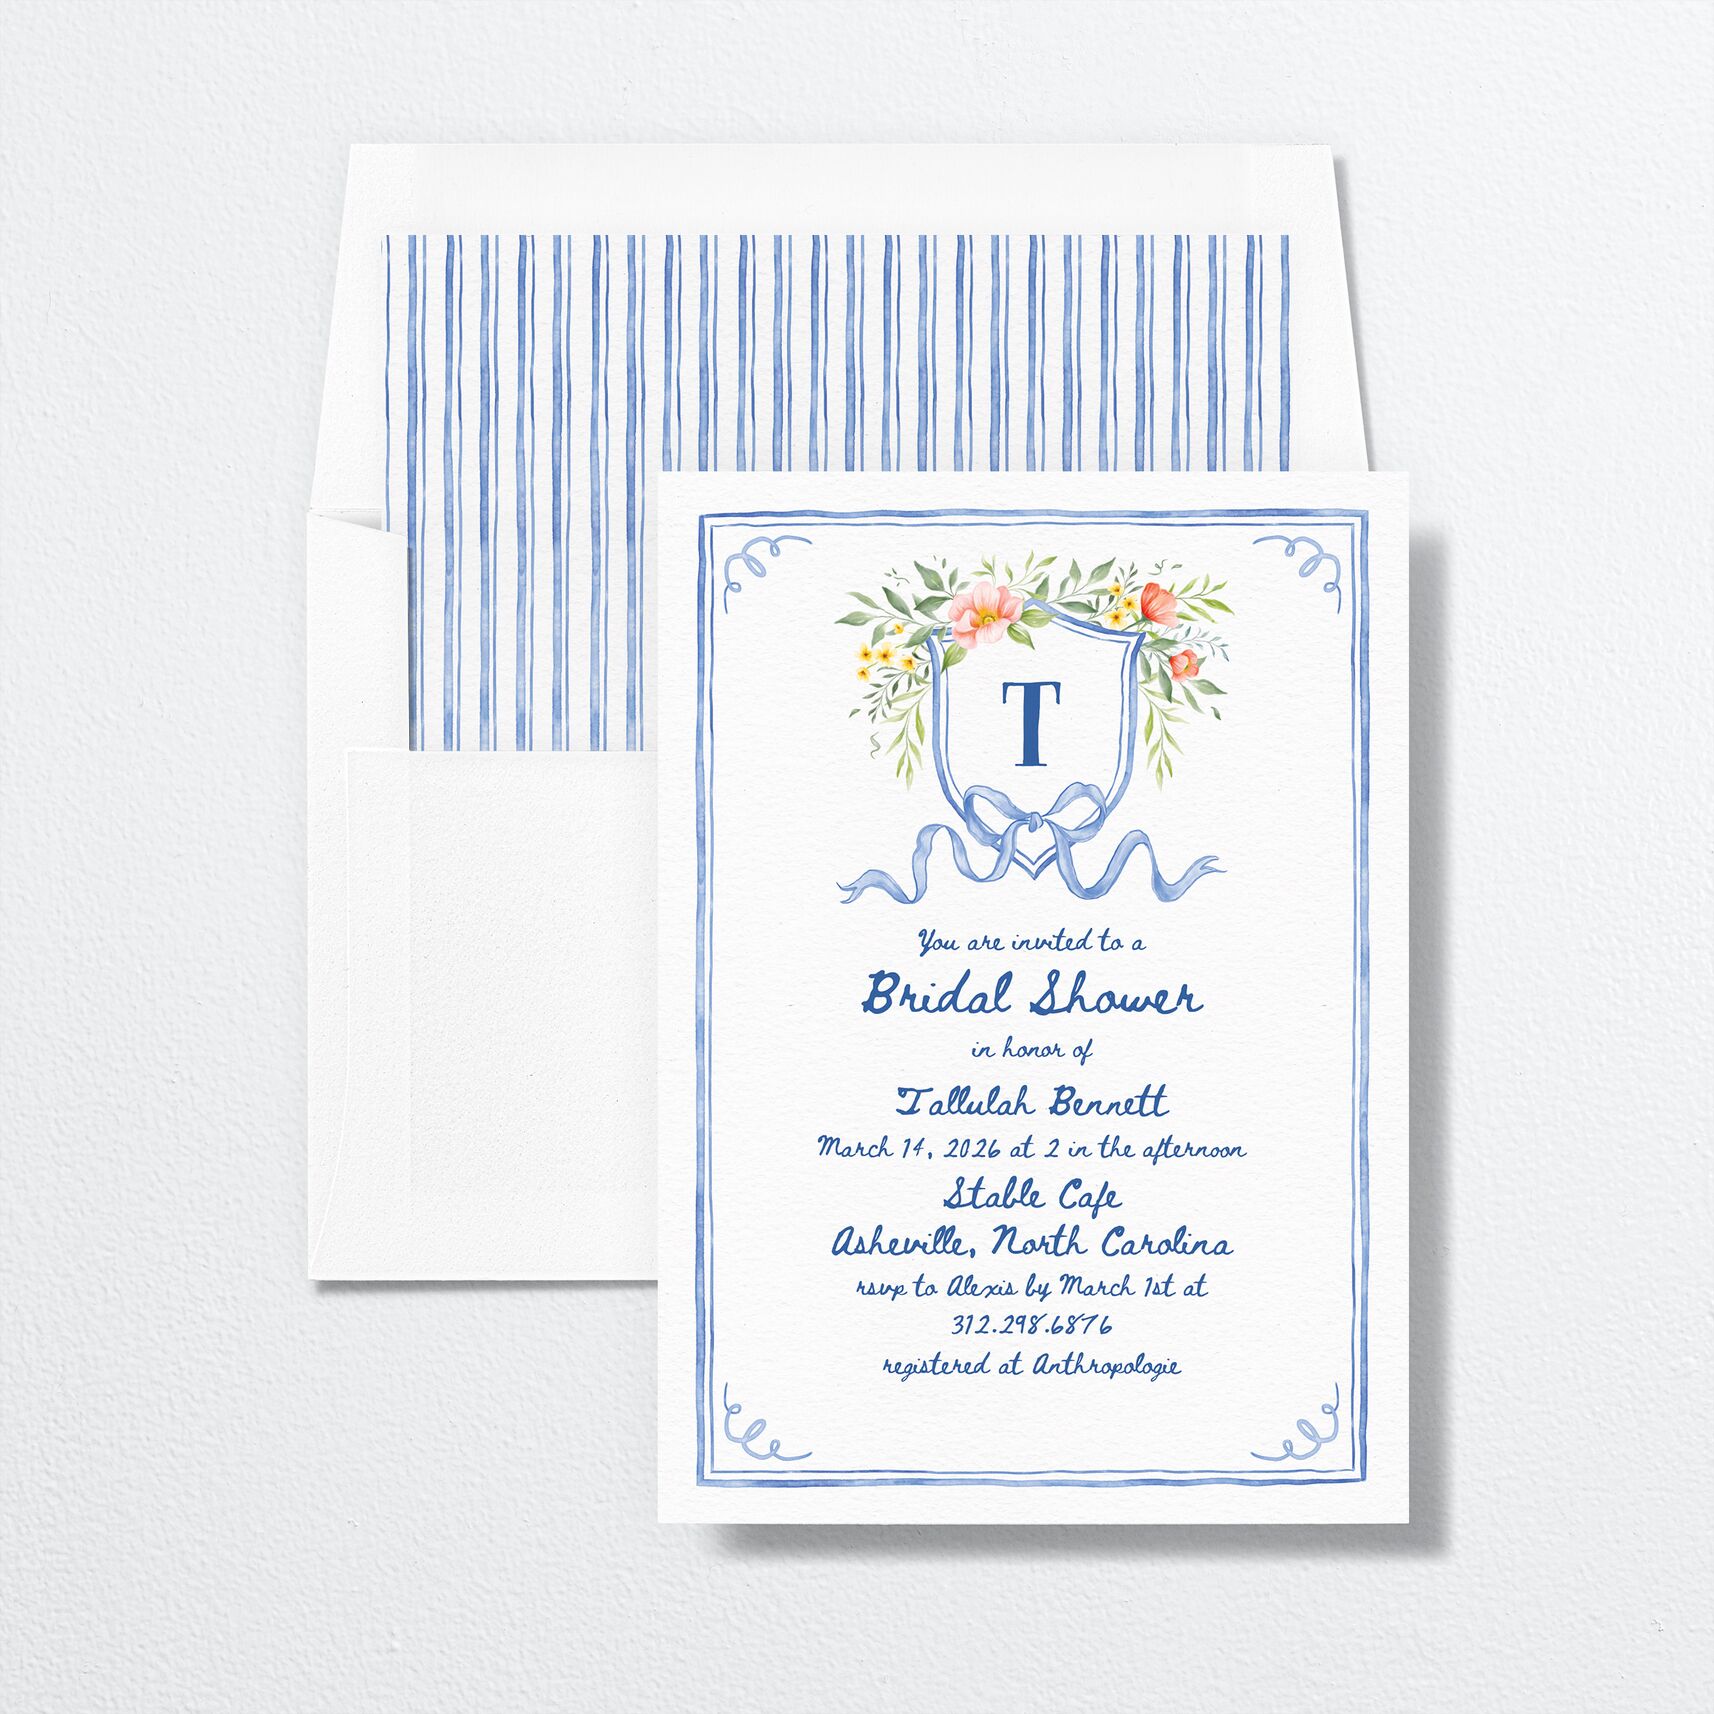 Countryside Crest Bridal Shower Invitations envelope-and-liner in blue